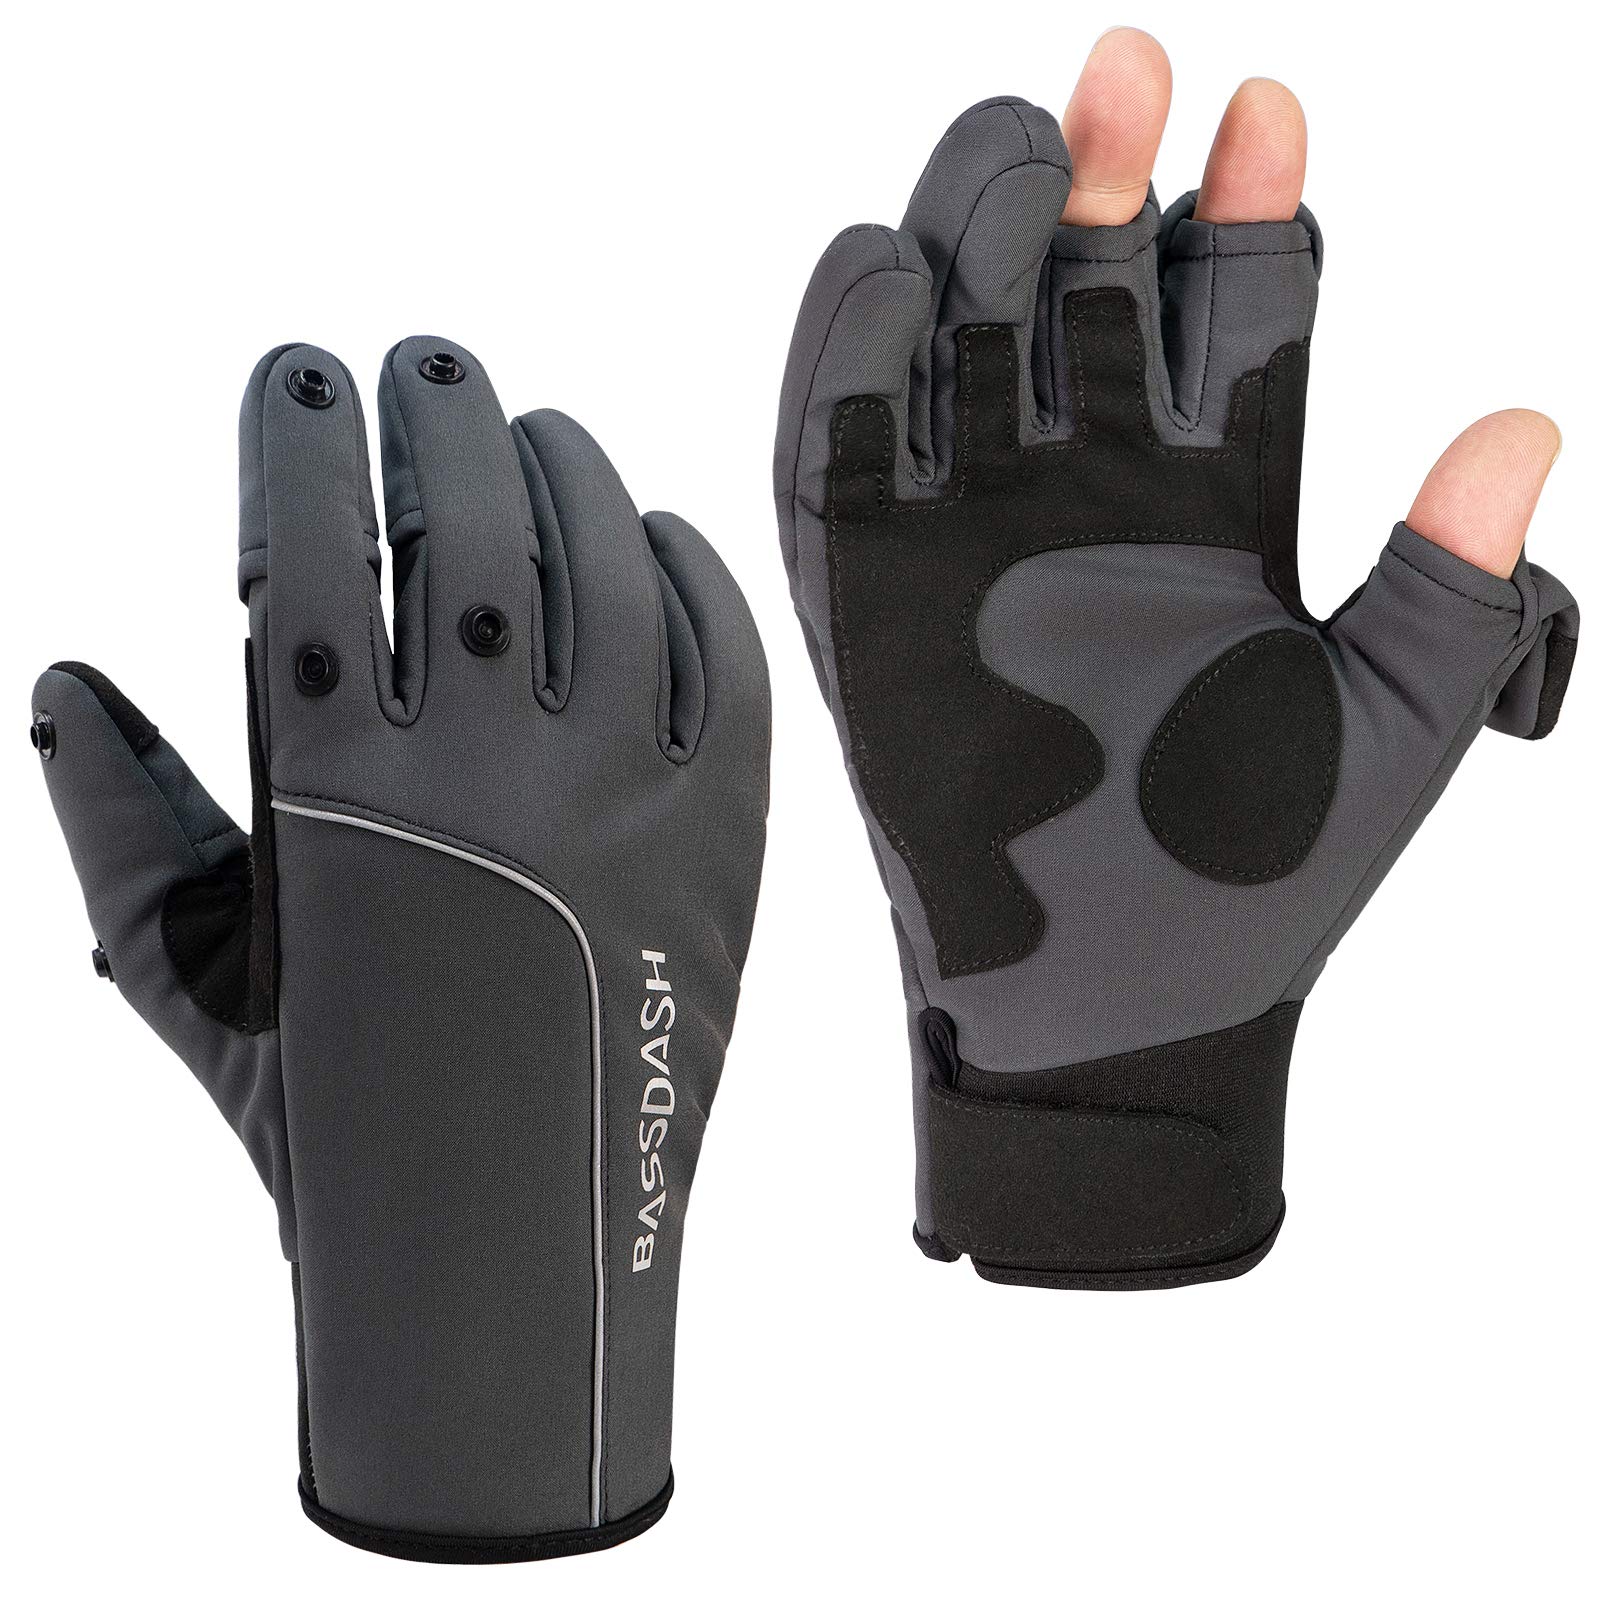 SAFEAT Safety Grip Work Gloves for Men and Women – Protective